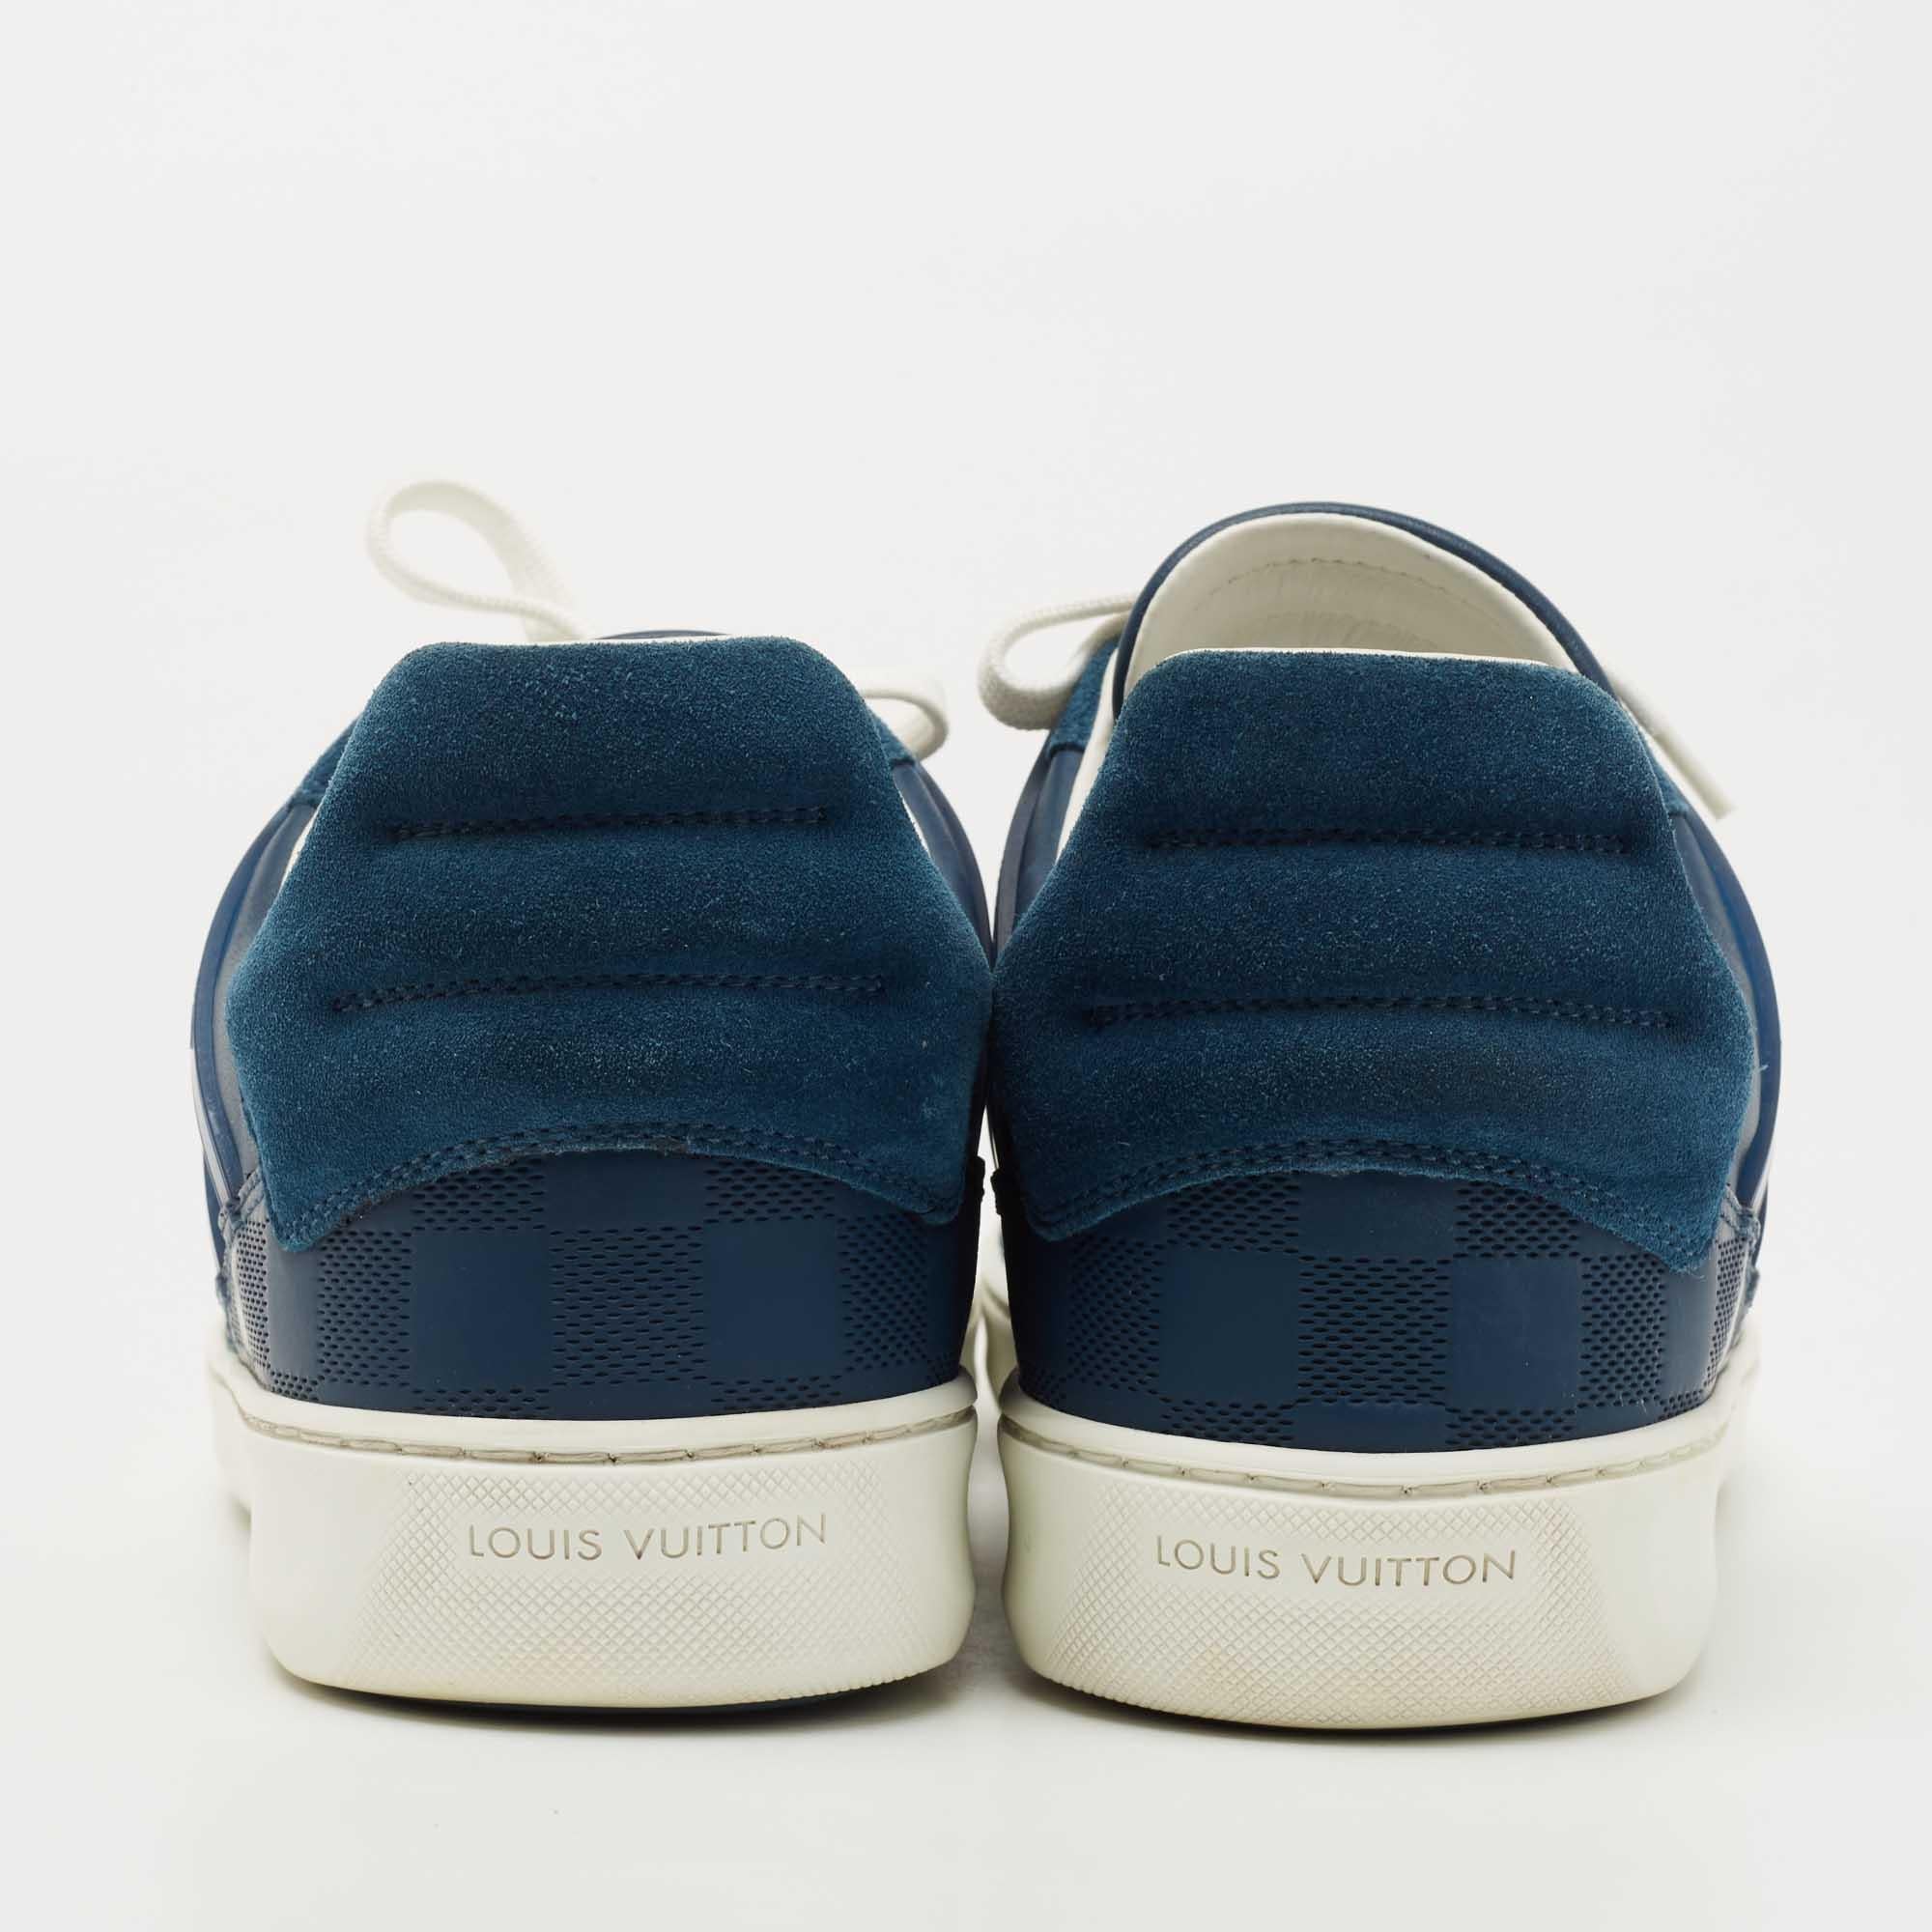 Louis Vuitton Blue Leather and Suede Low Top Sneakers Size 40.5 For Sale 1